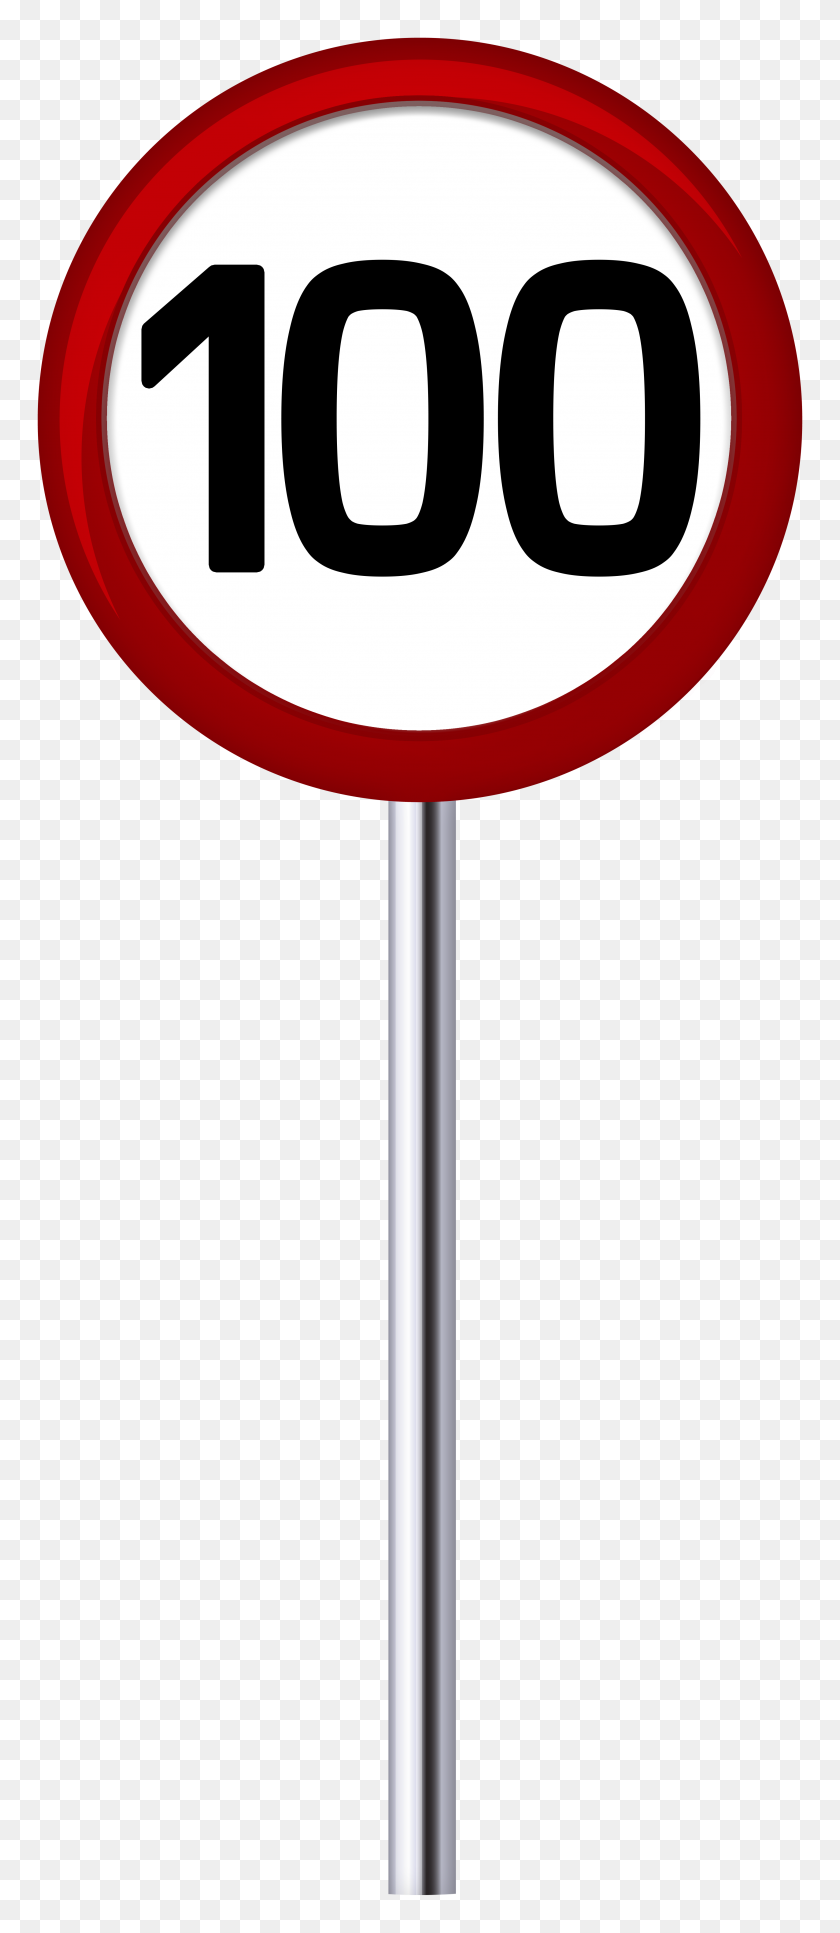 3331x8000 Speed Sign Clipart - Traffic Signal Clipart